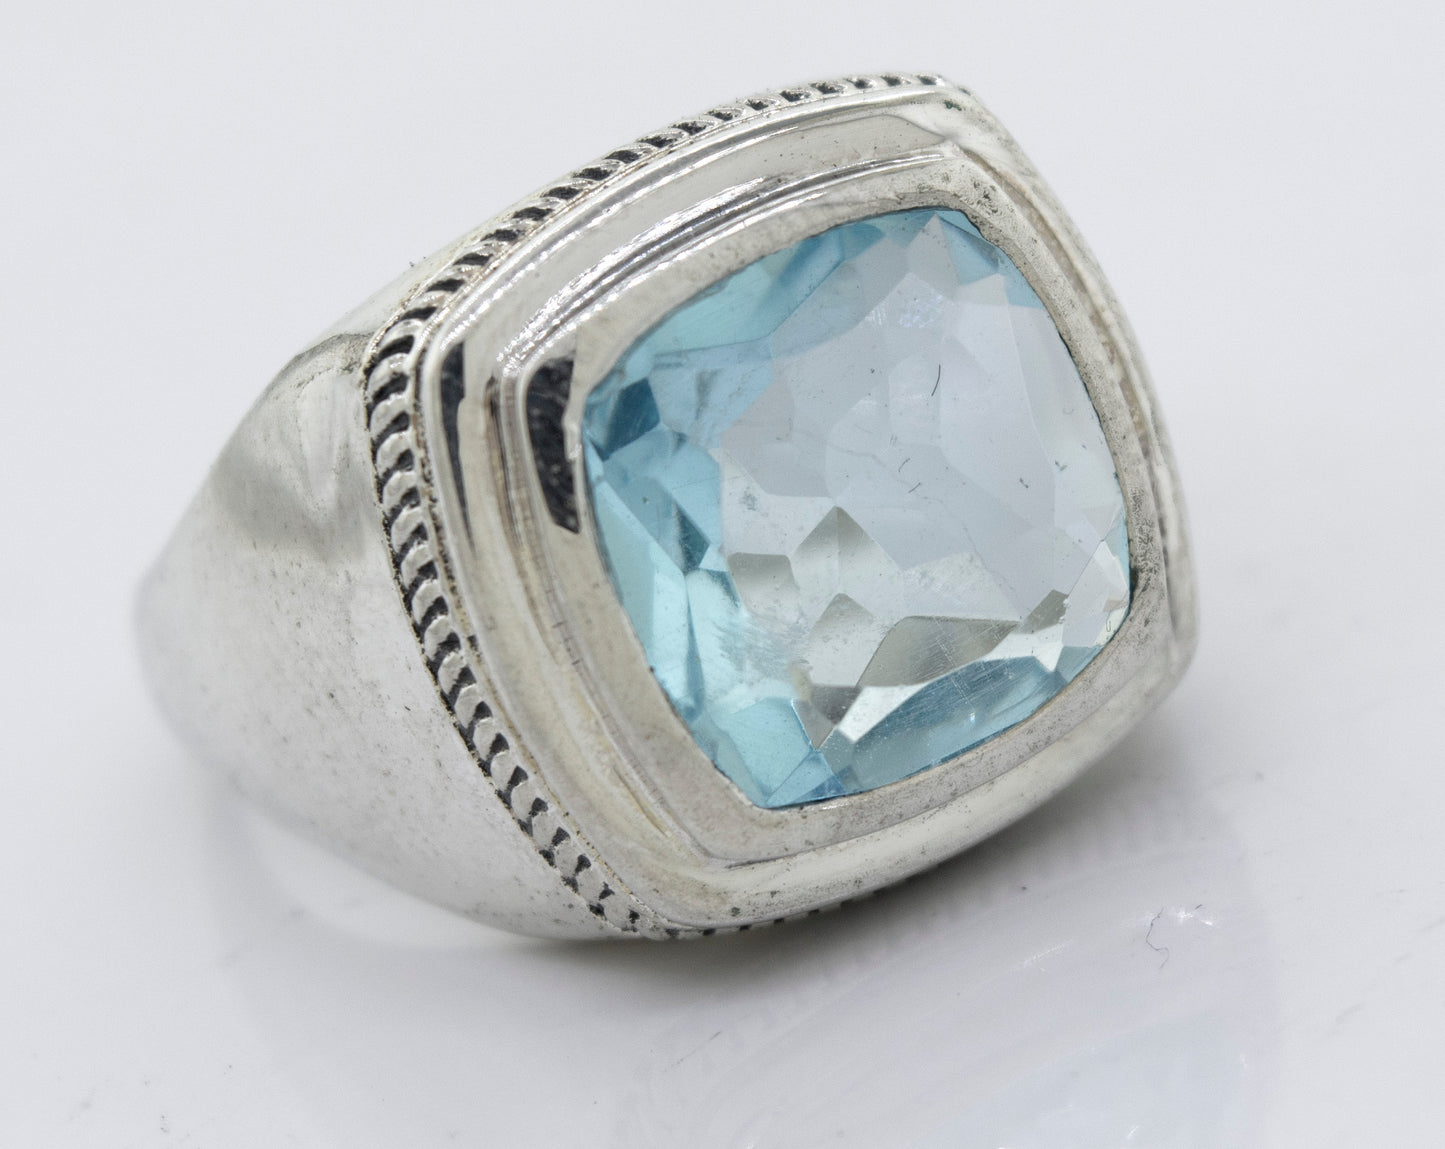 
                  
                    A Faceted Stone Signet Ring with a large, square-cut aquamarine gemstone in the center, featuring detailed engravings around the setting.
                  
                